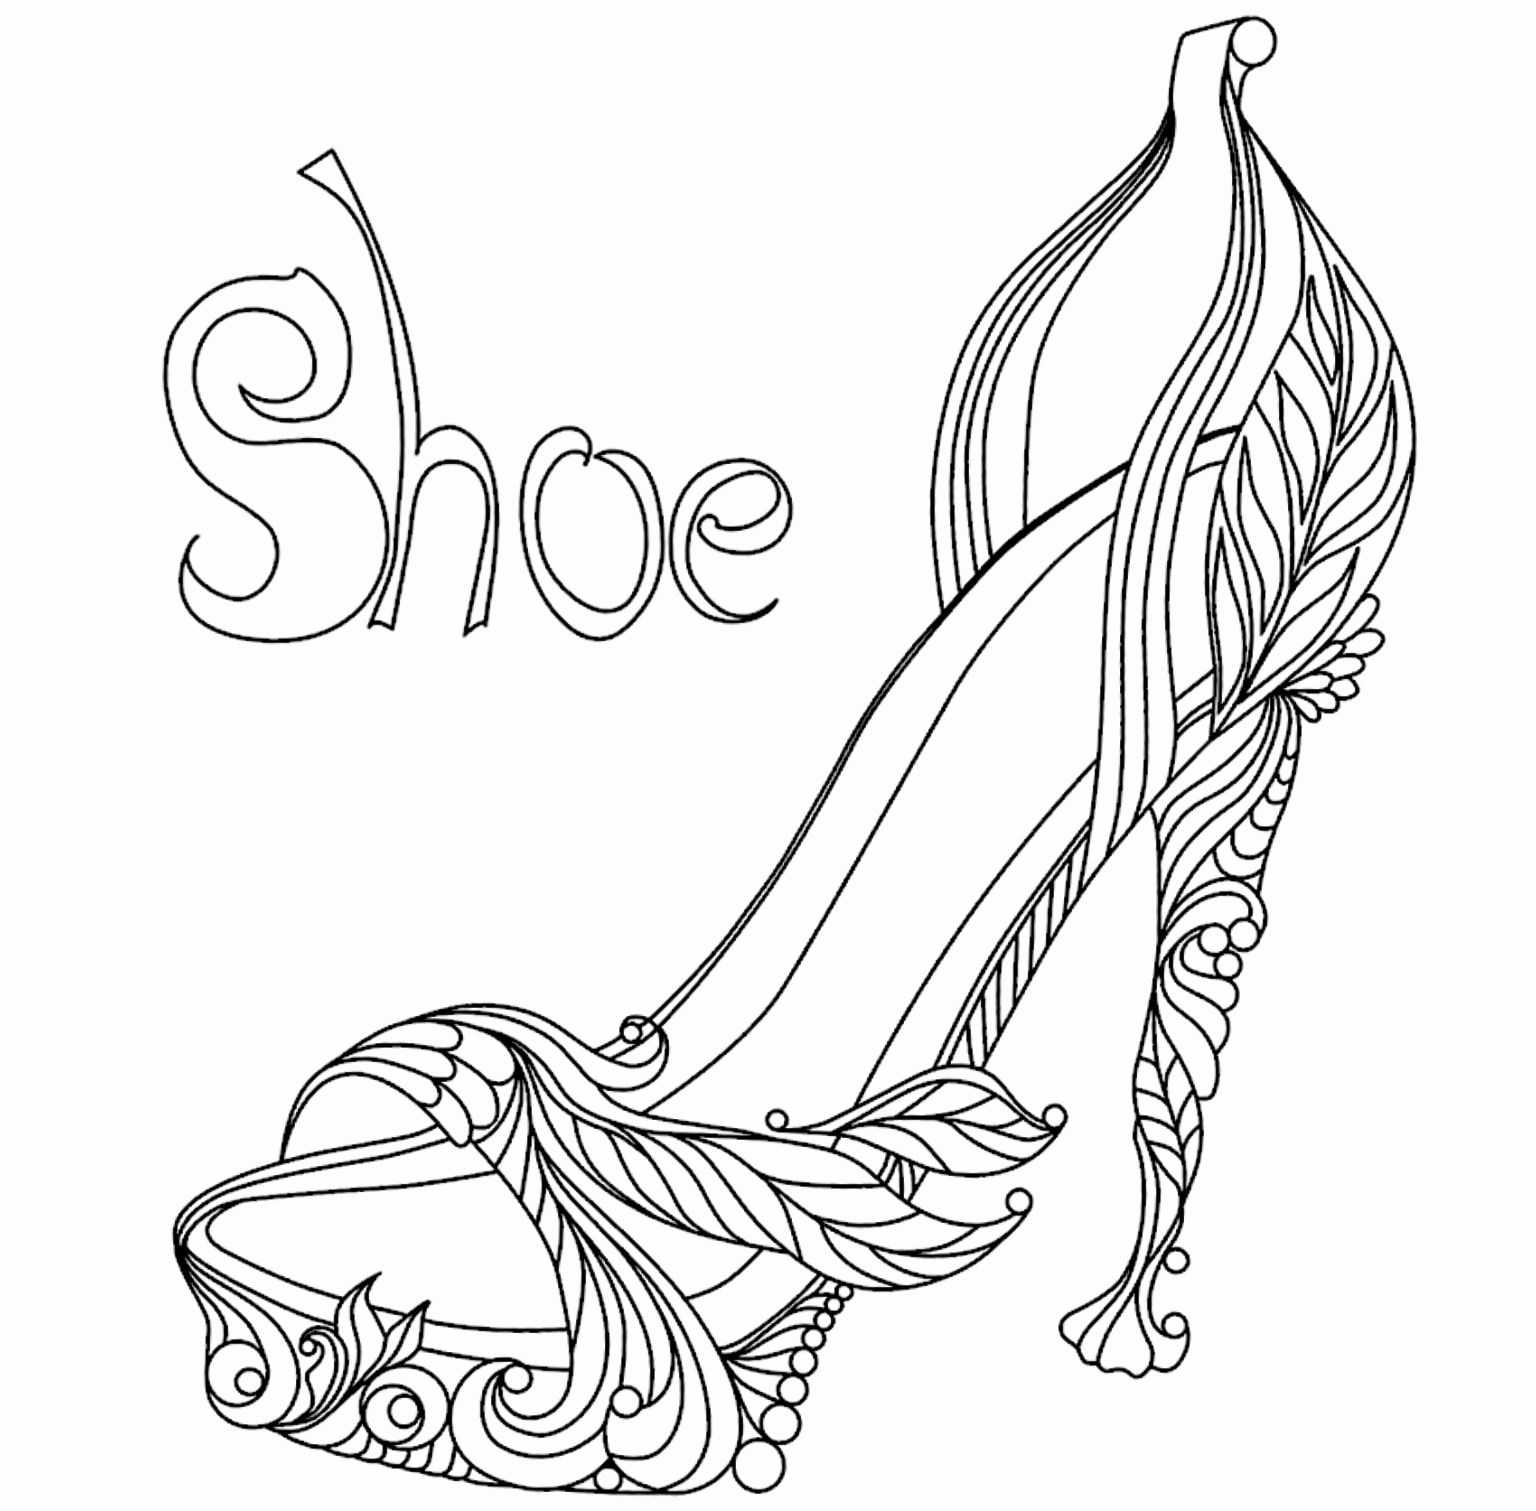 High Heel Drawing Template At Paintingvalley | Explore With High Heel Template For Cards